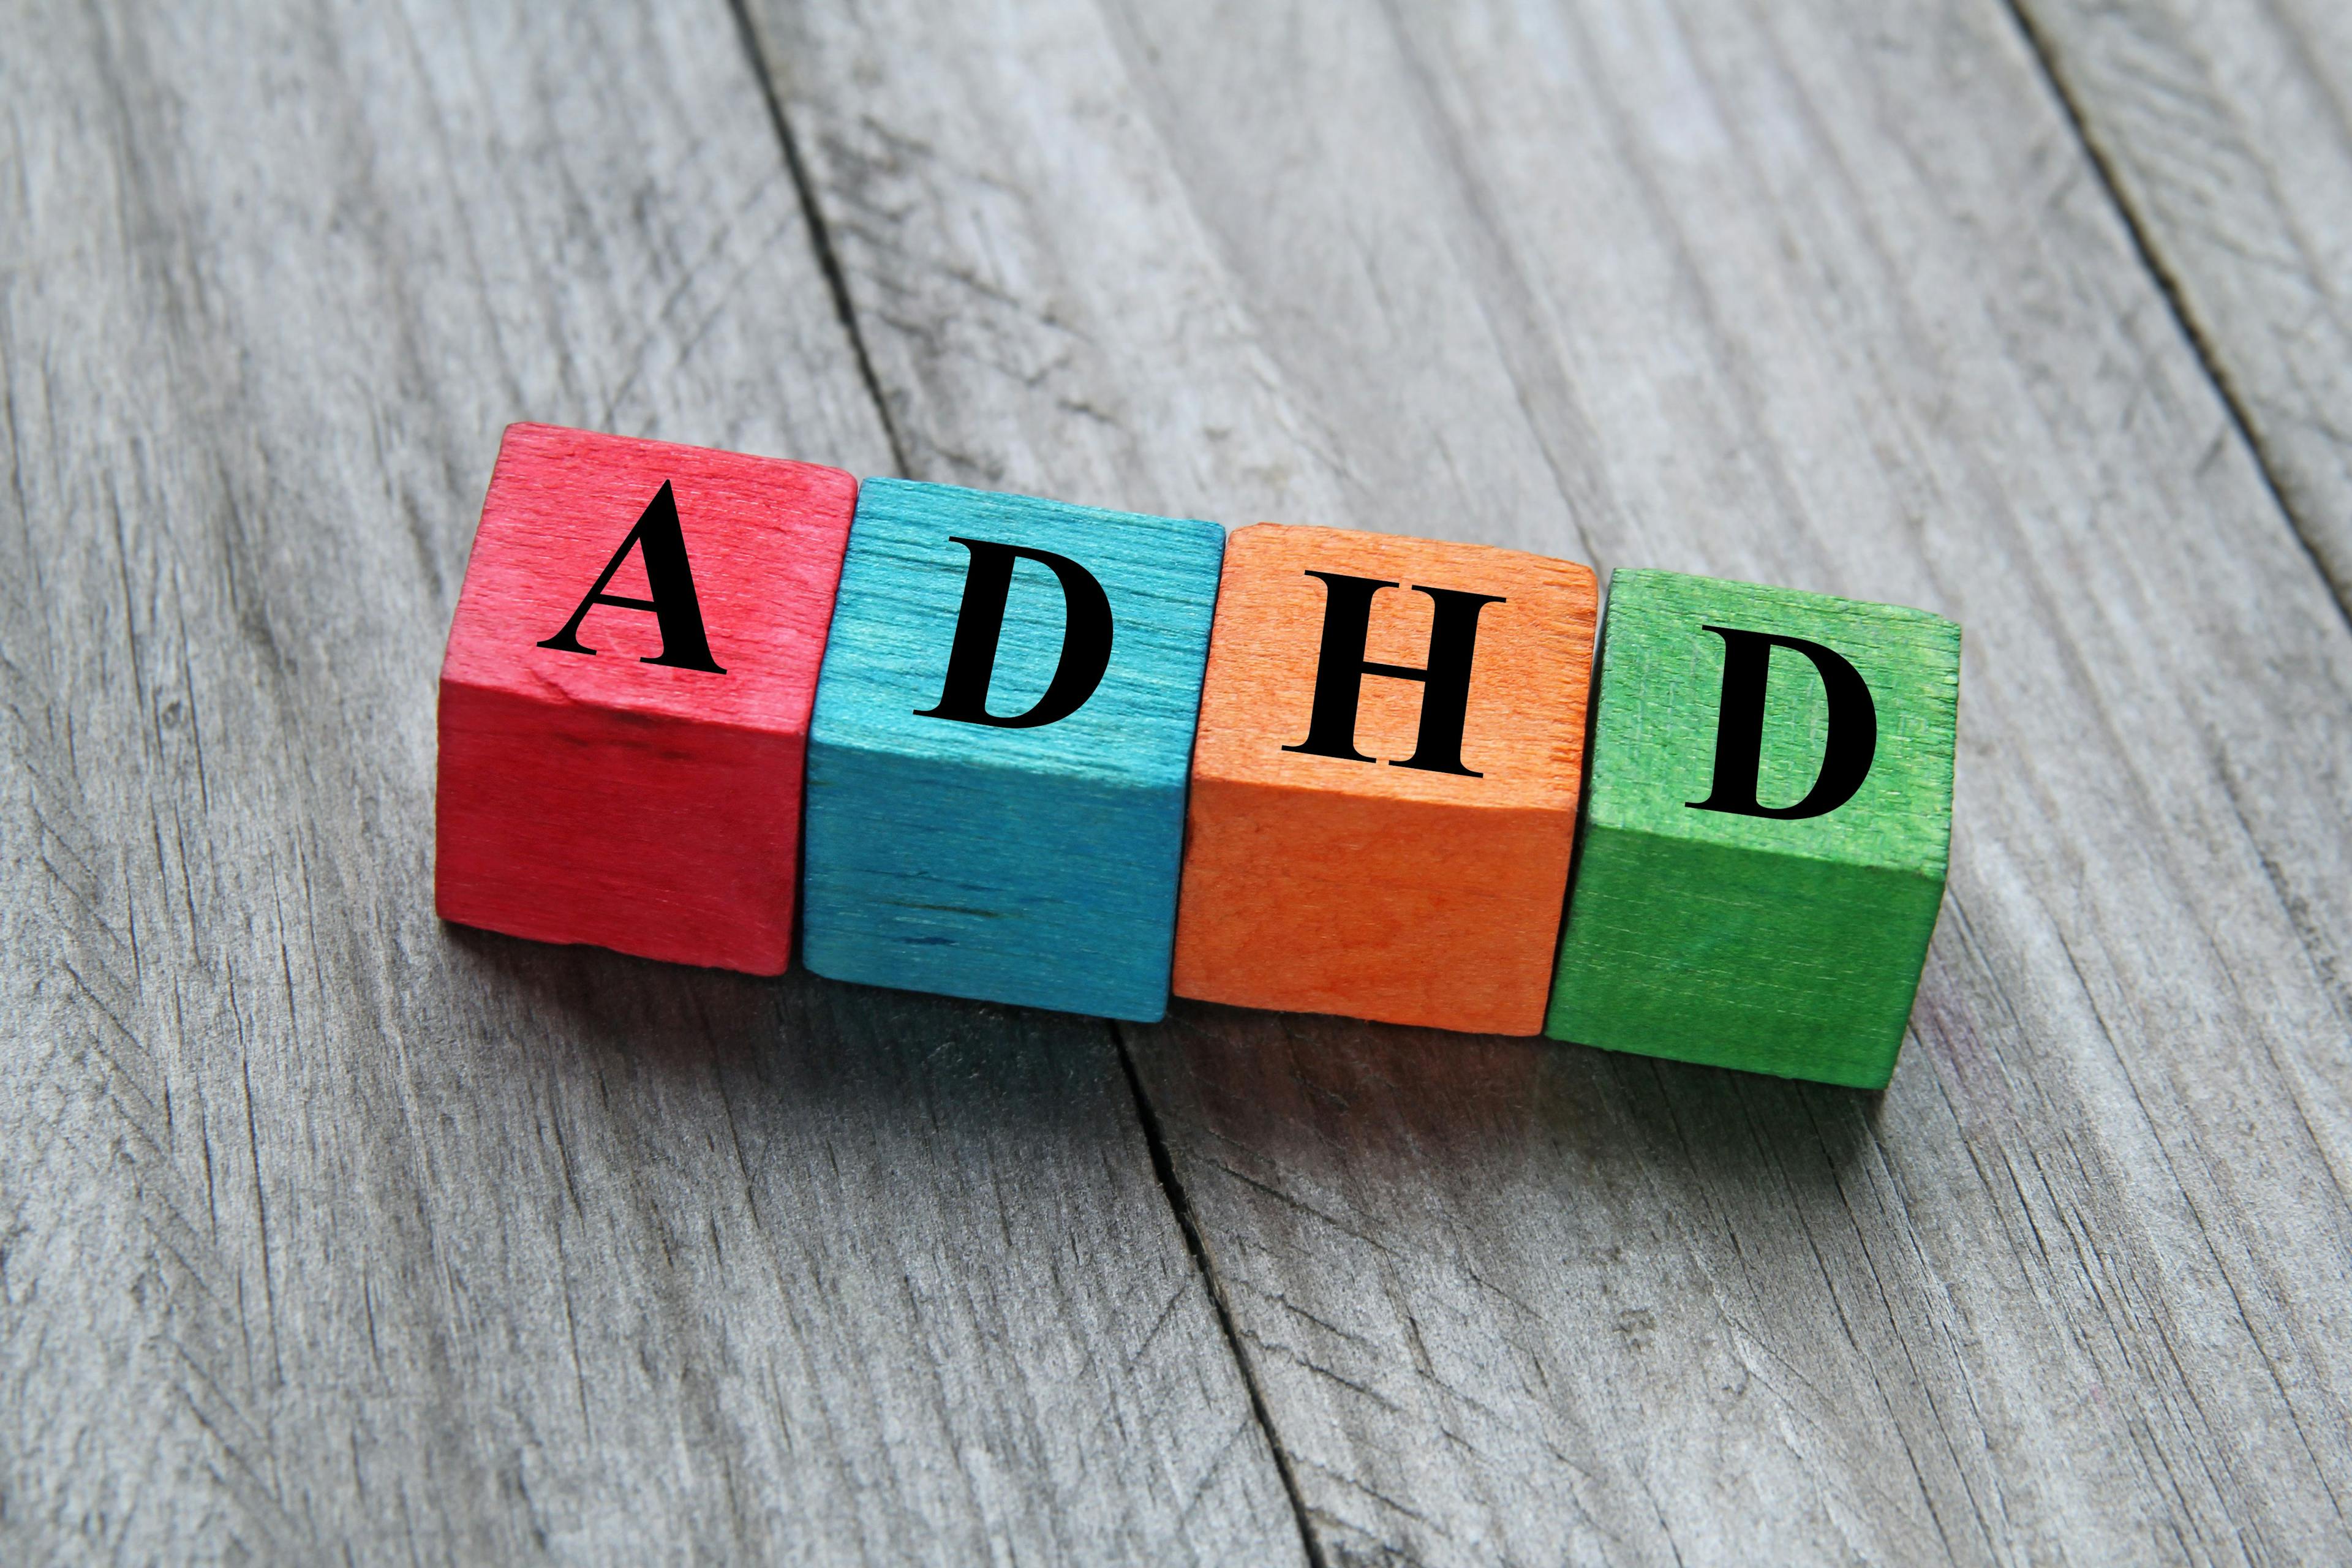 The investigators suggested that future research explore the connection between ADHD risk in children and depression in pregnant parents.